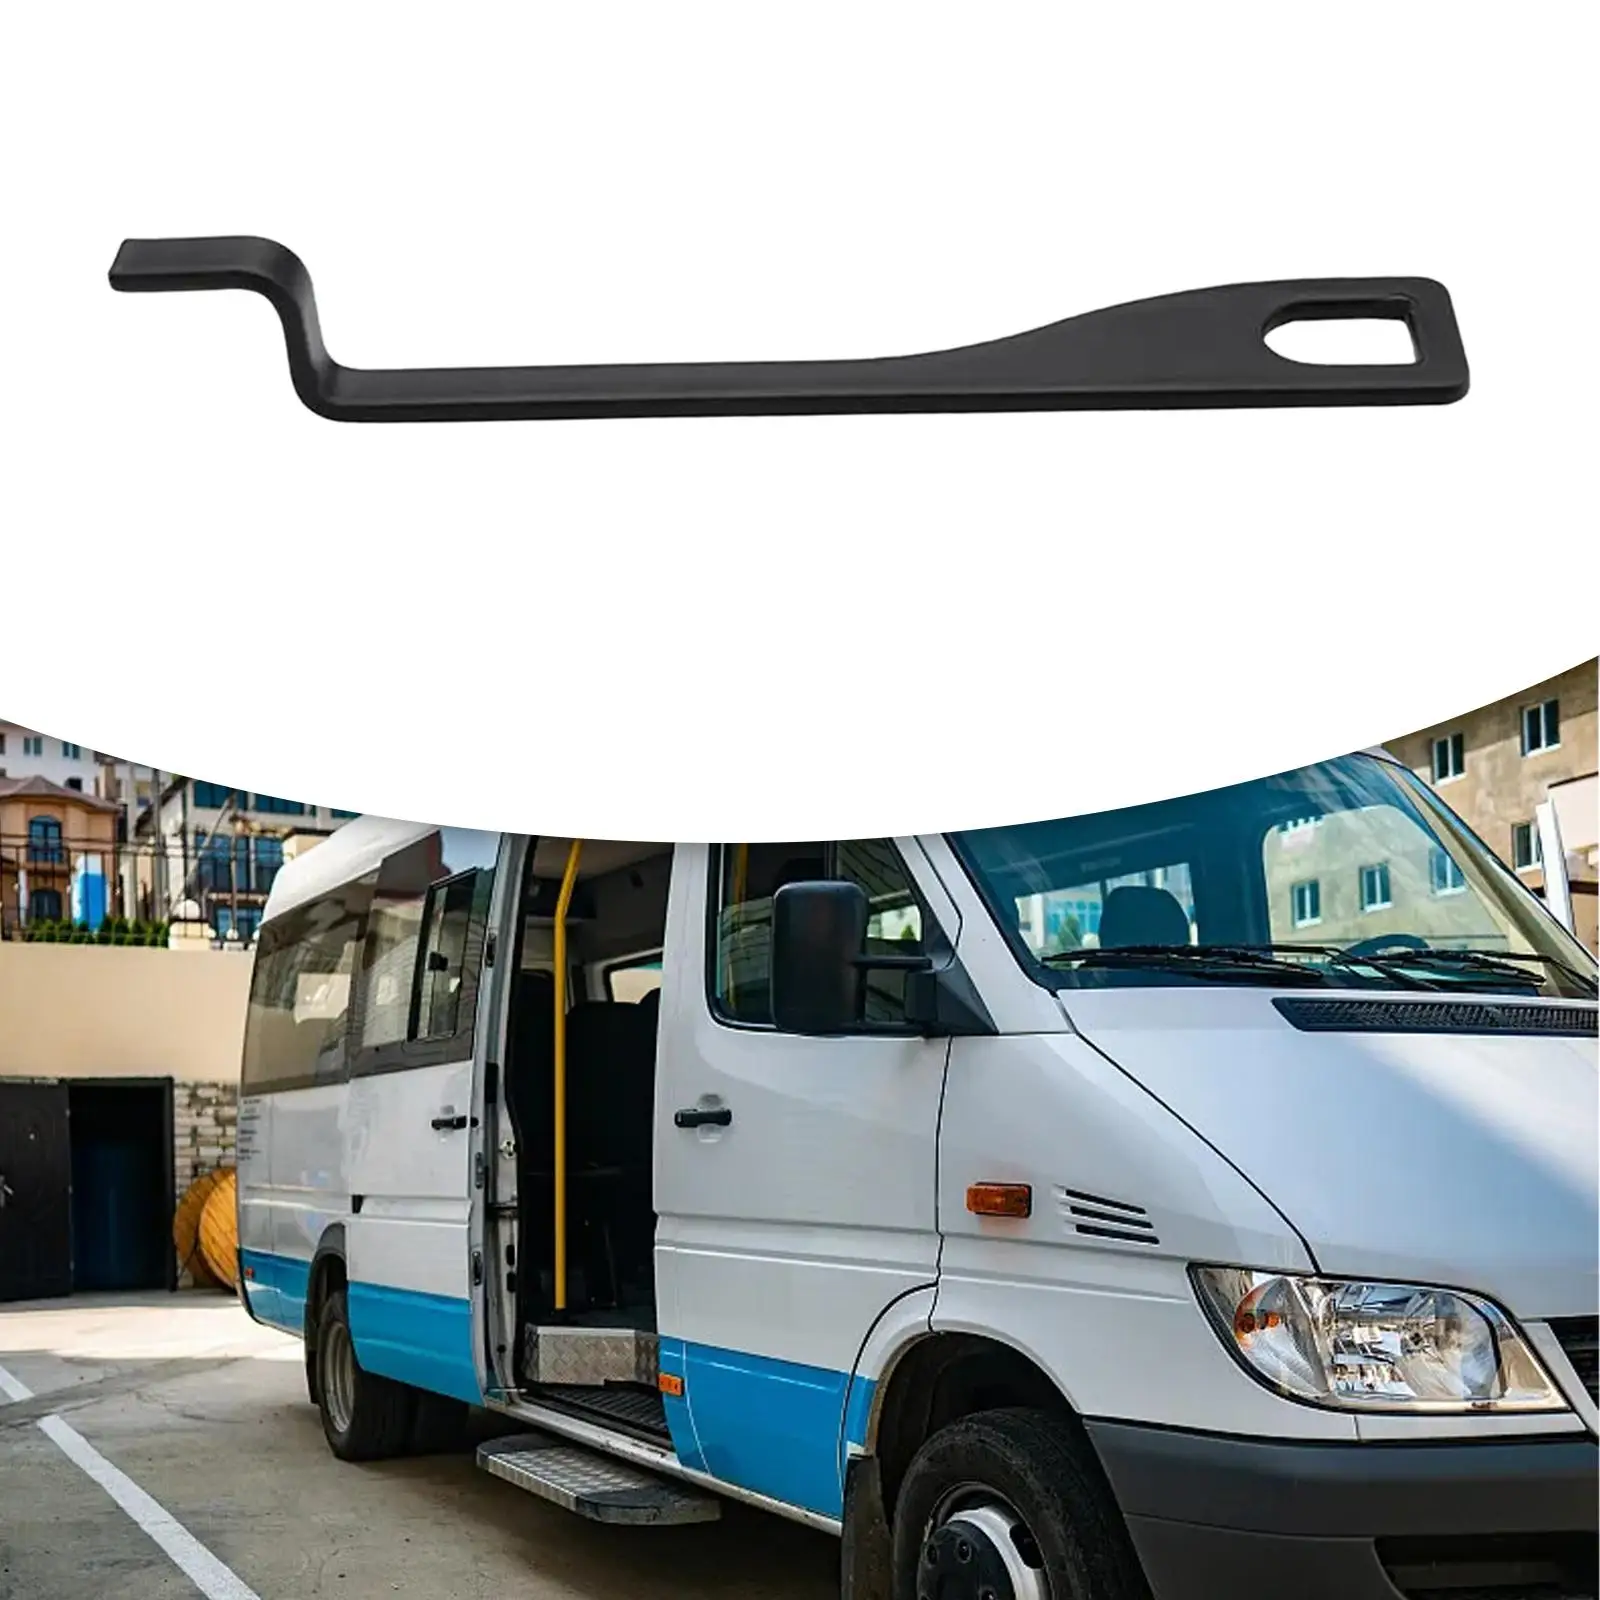 Tailgate Barn Door Standoff Easy to Install Direct Replaces Spare Parts Car Accessories Length 20cm for Volkswagen T4 T5 T6